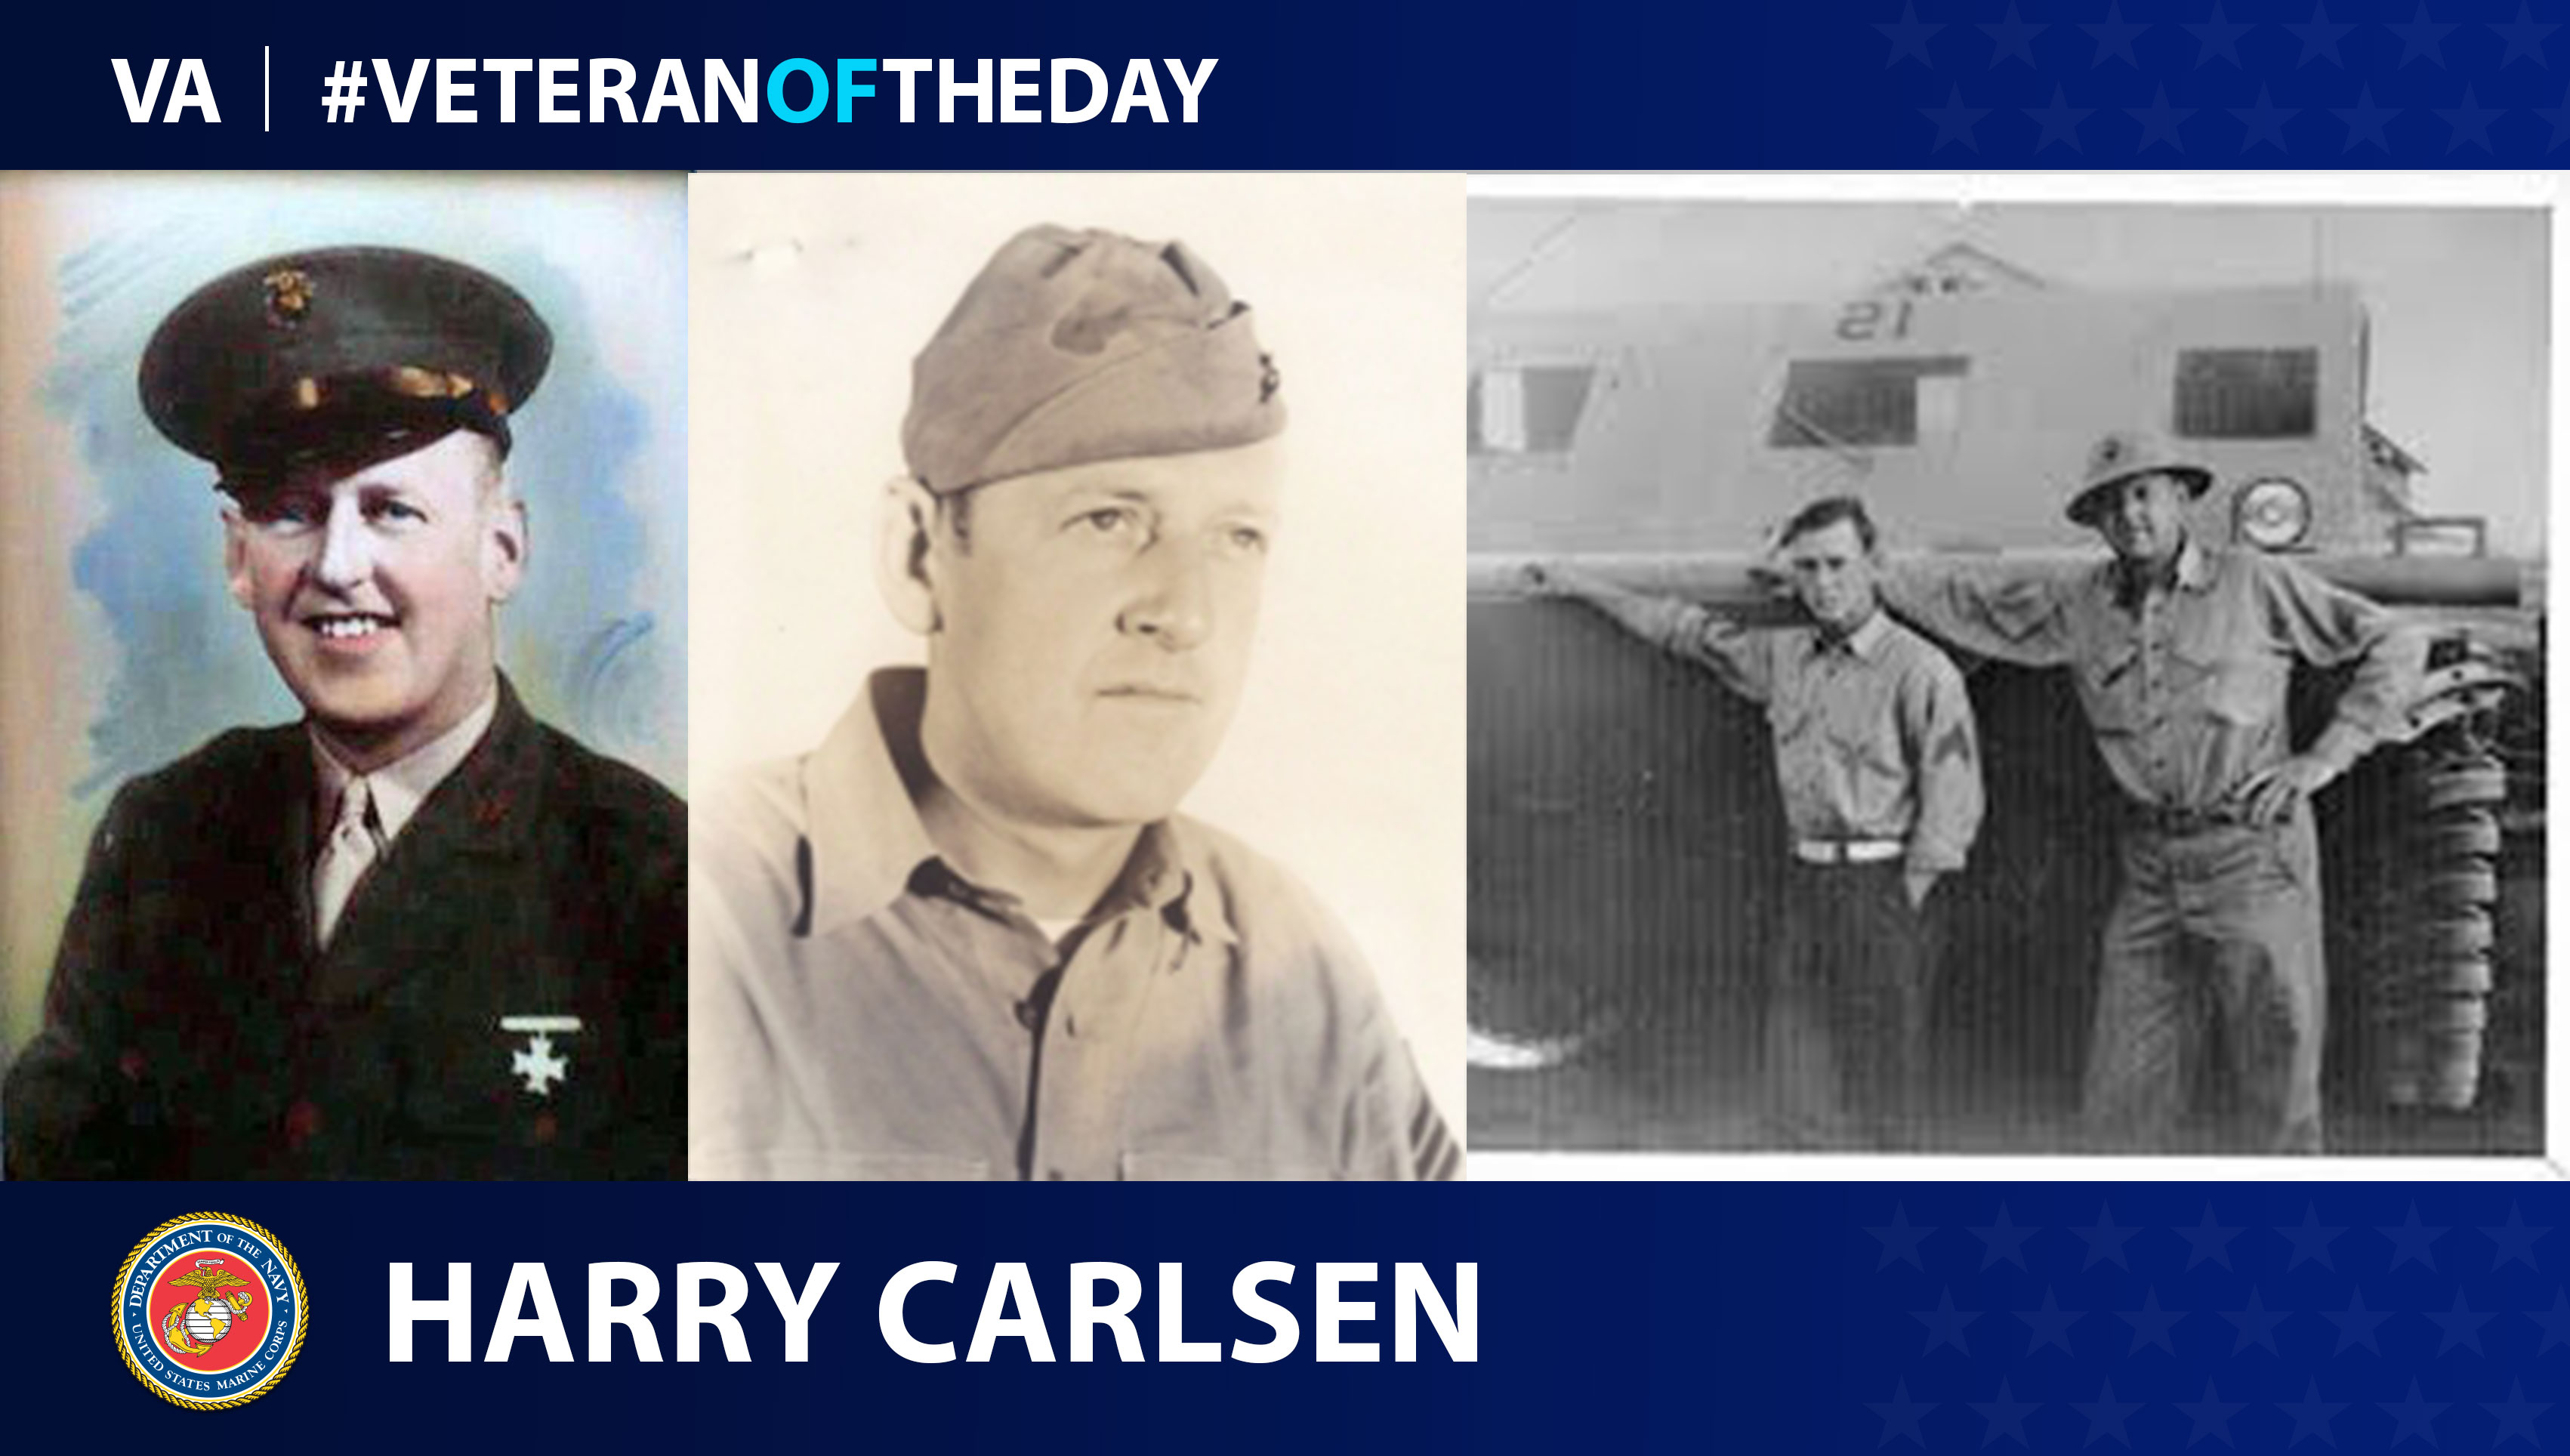 Harry "Bud" Carlsen is today's Veteran of the Day.